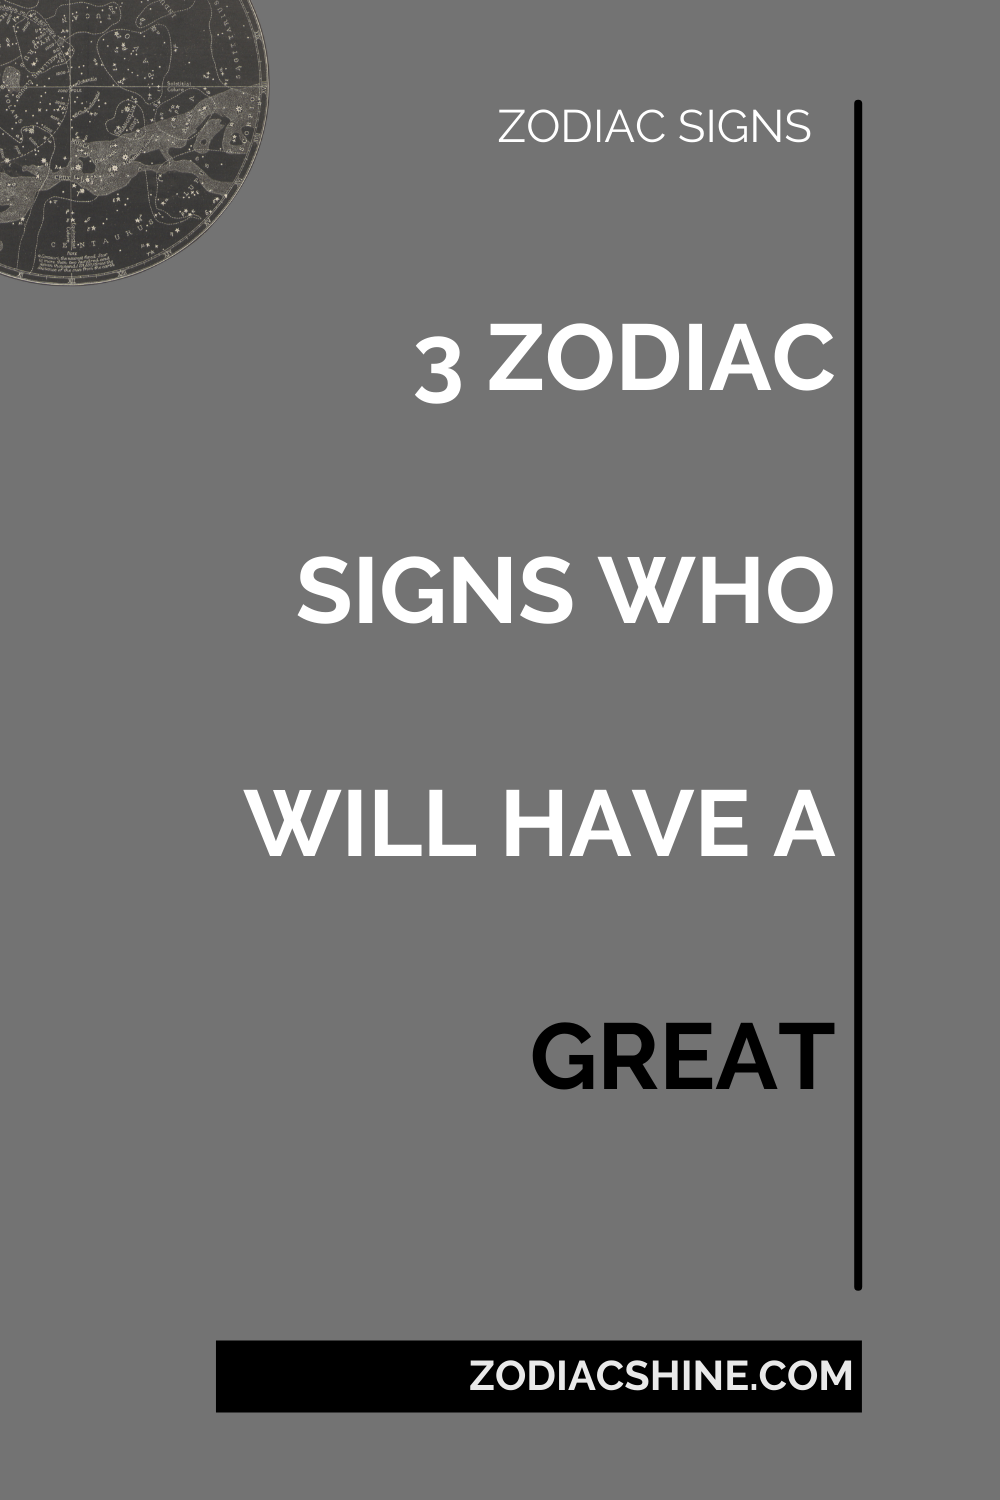 3 ZODIAC SIGNS WHO WILL HAVE A GREAT